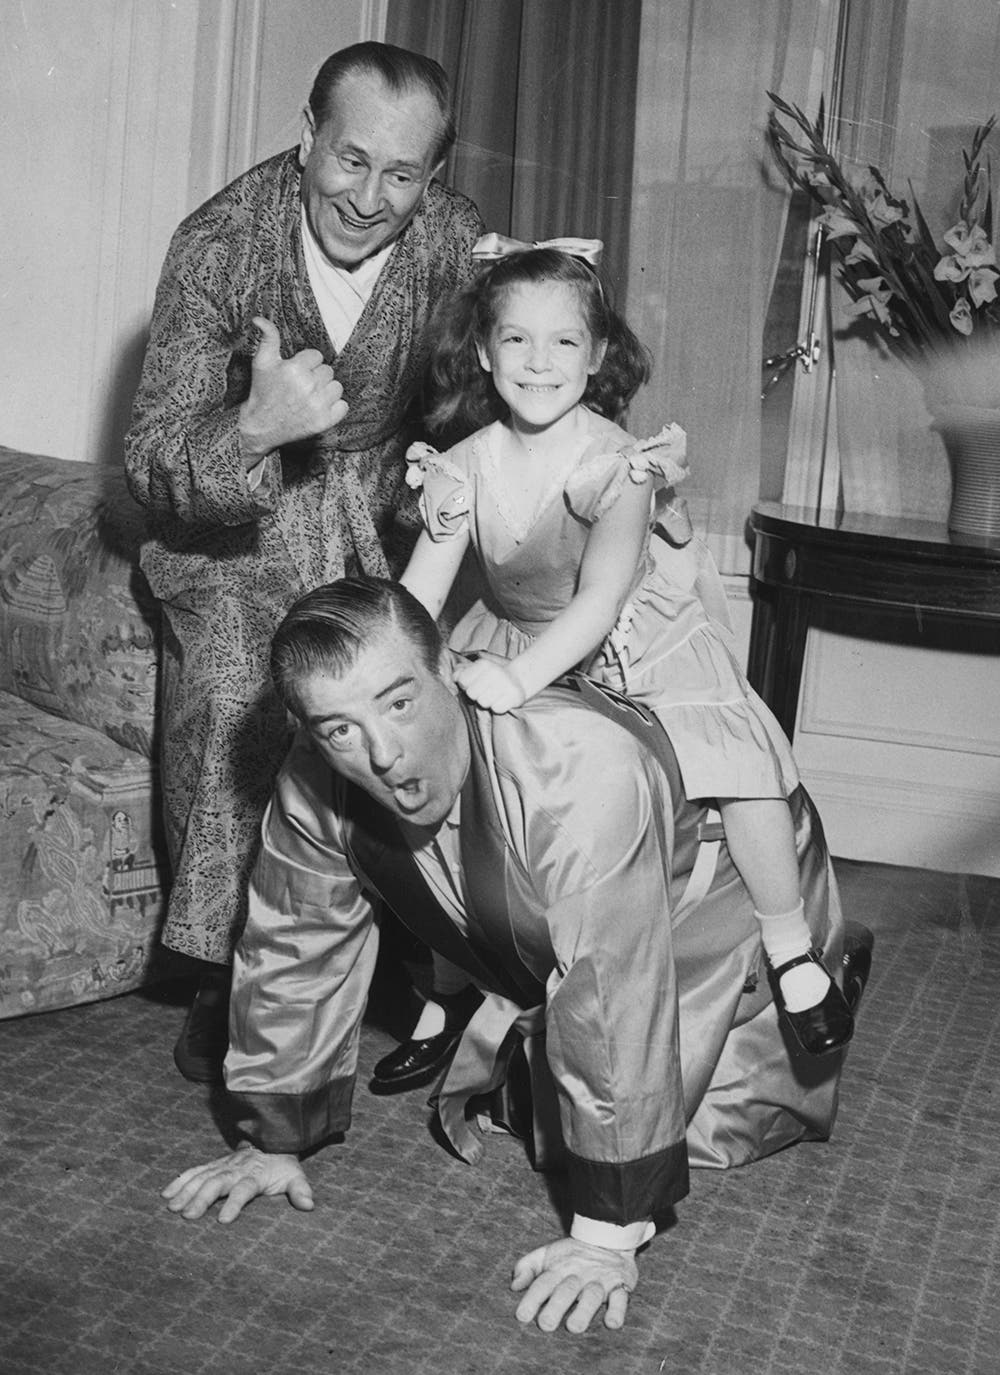 Abbott and Costello in suits and smiling at the camera as they play horse ride with daughter Chris Costello